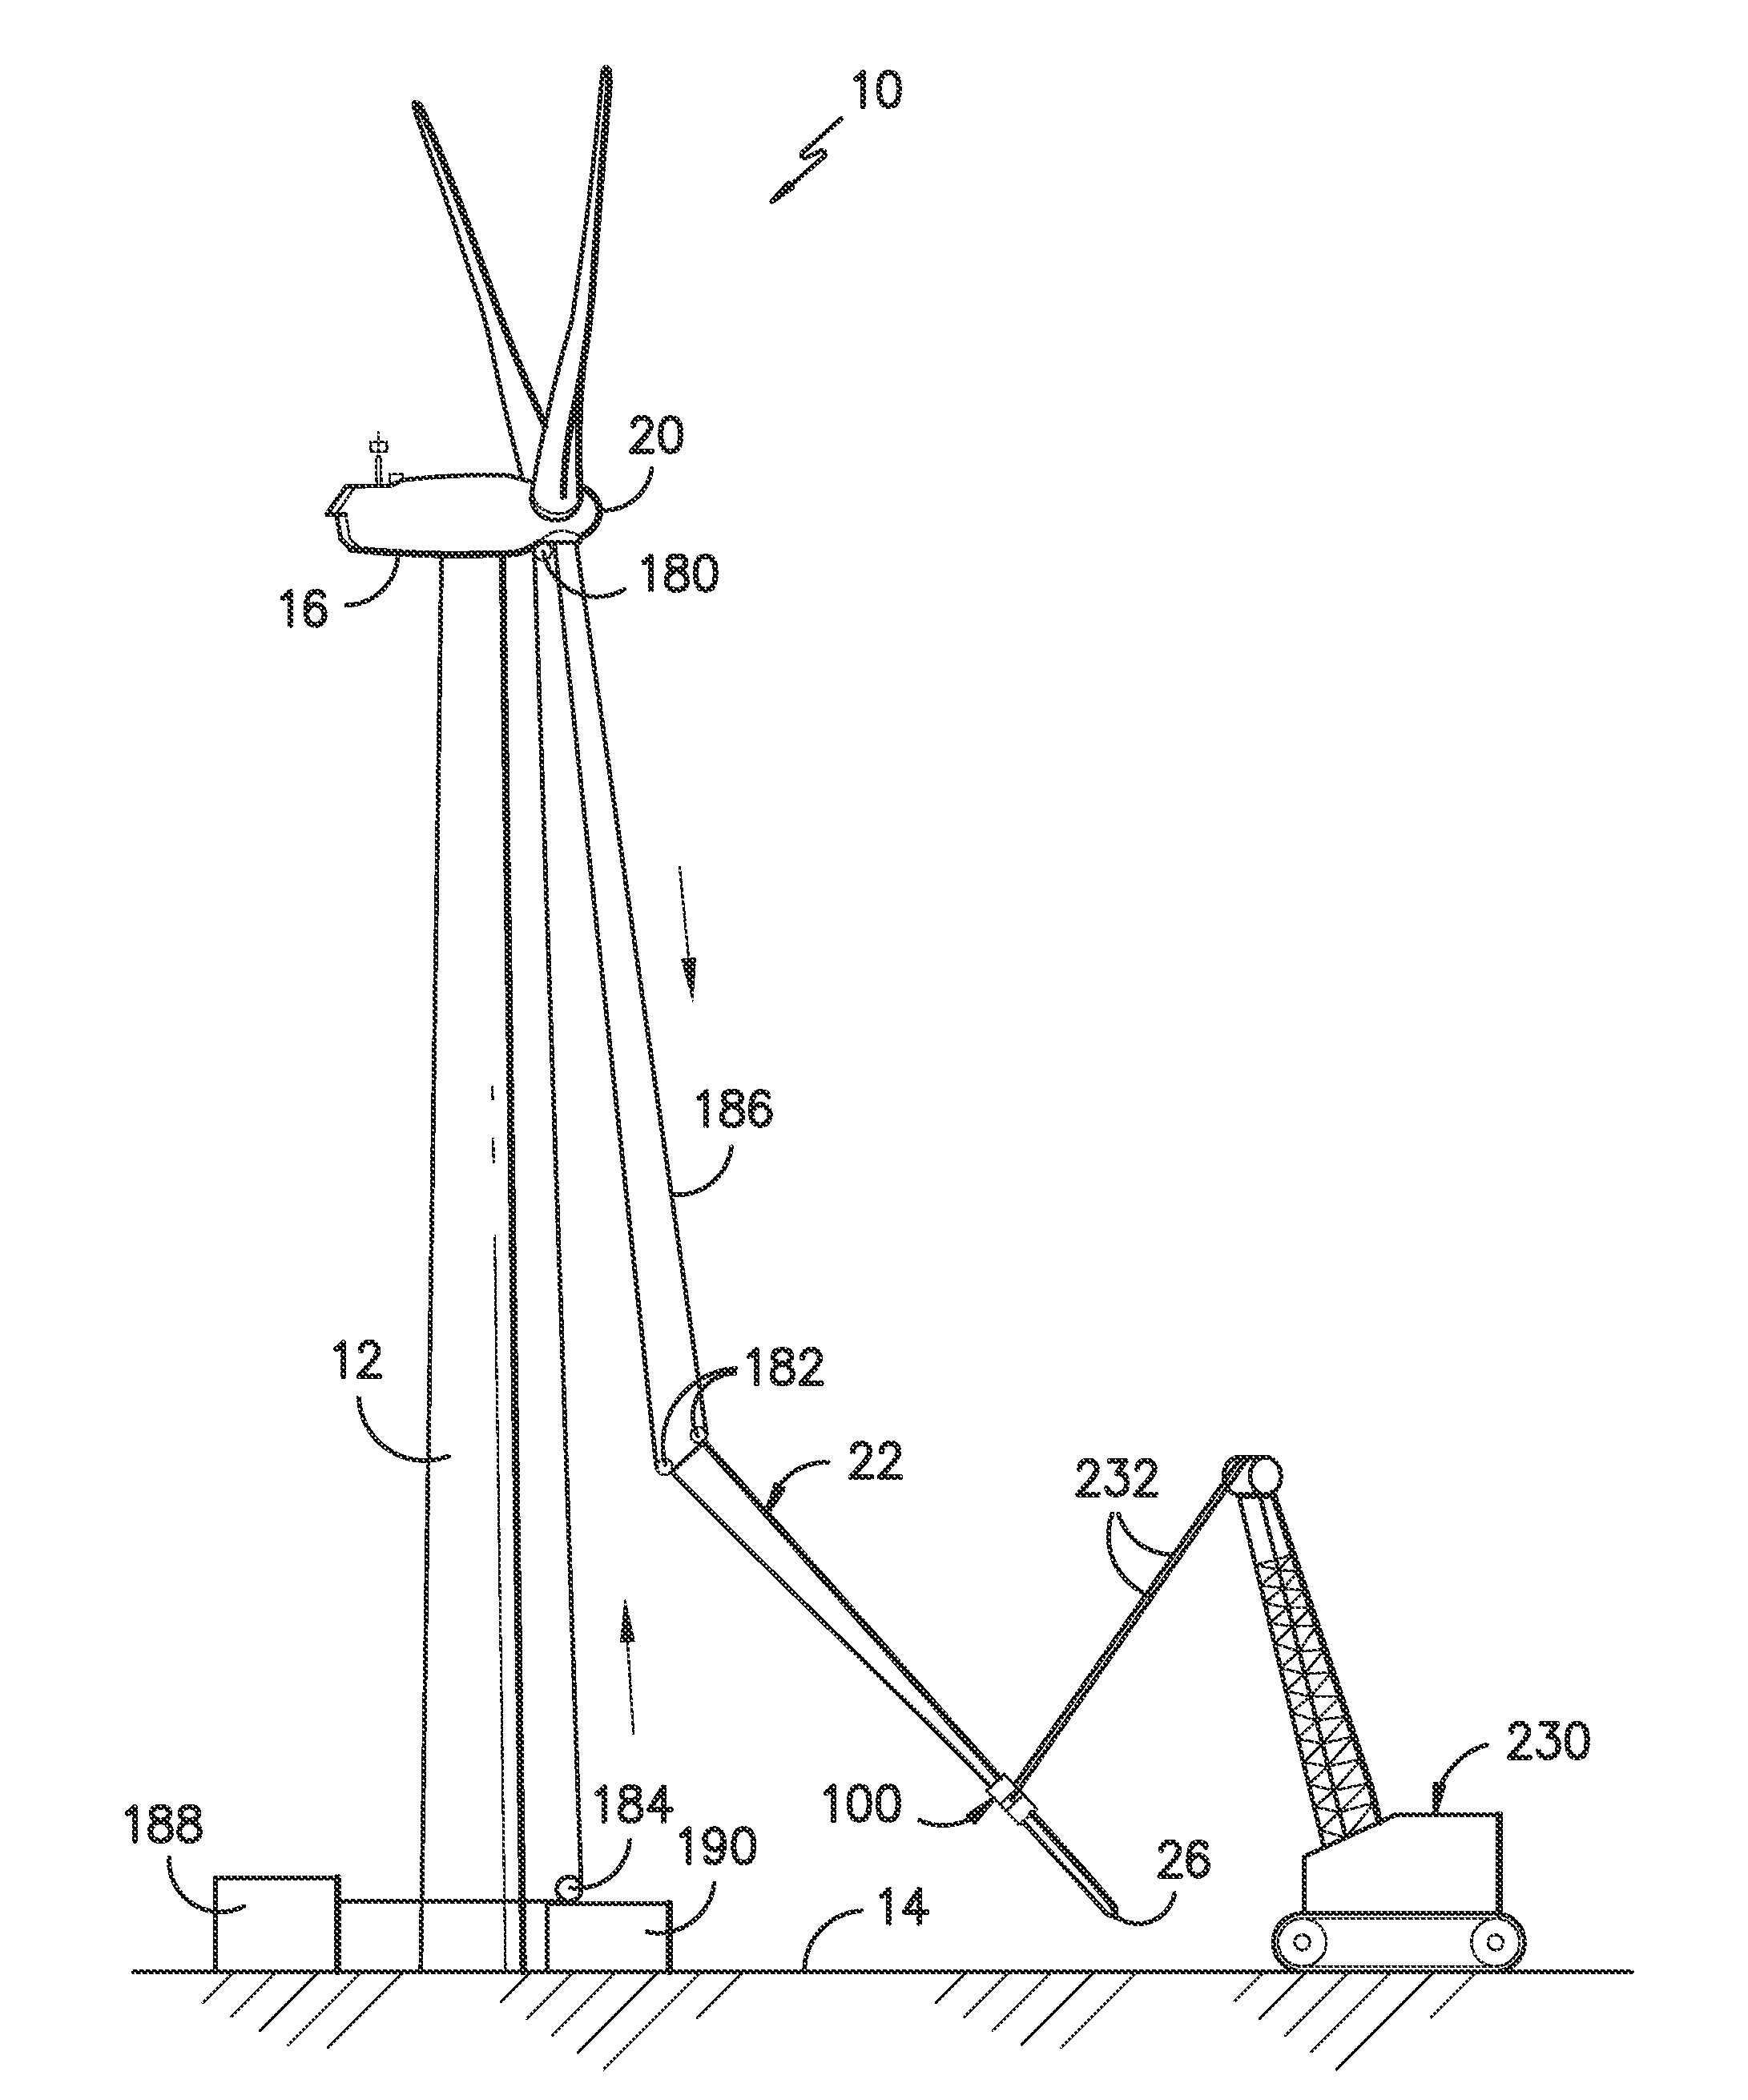 Methods and systems for removing and/or installing wind turbine rotor blades